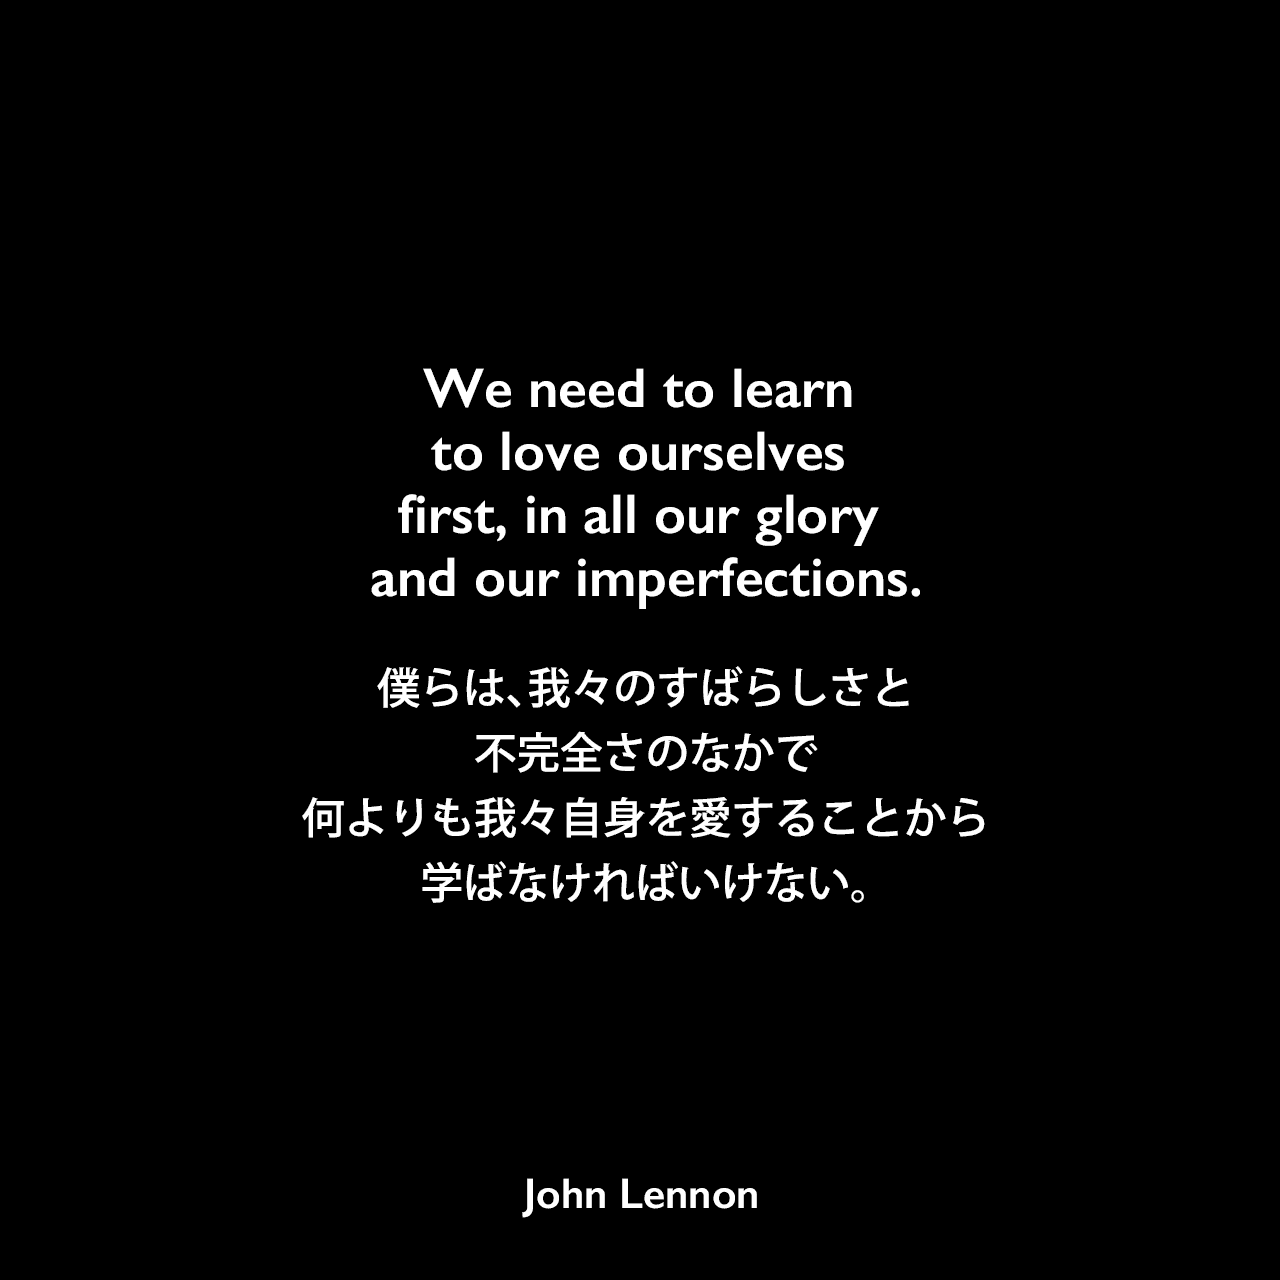 We need to learn to love ourselves first, in all our glory and our imperfections.僕らは、我々のすばらしさと不完全さのなかで、何よりも我々自身を愛することから学ばなければいけない。John Lennon